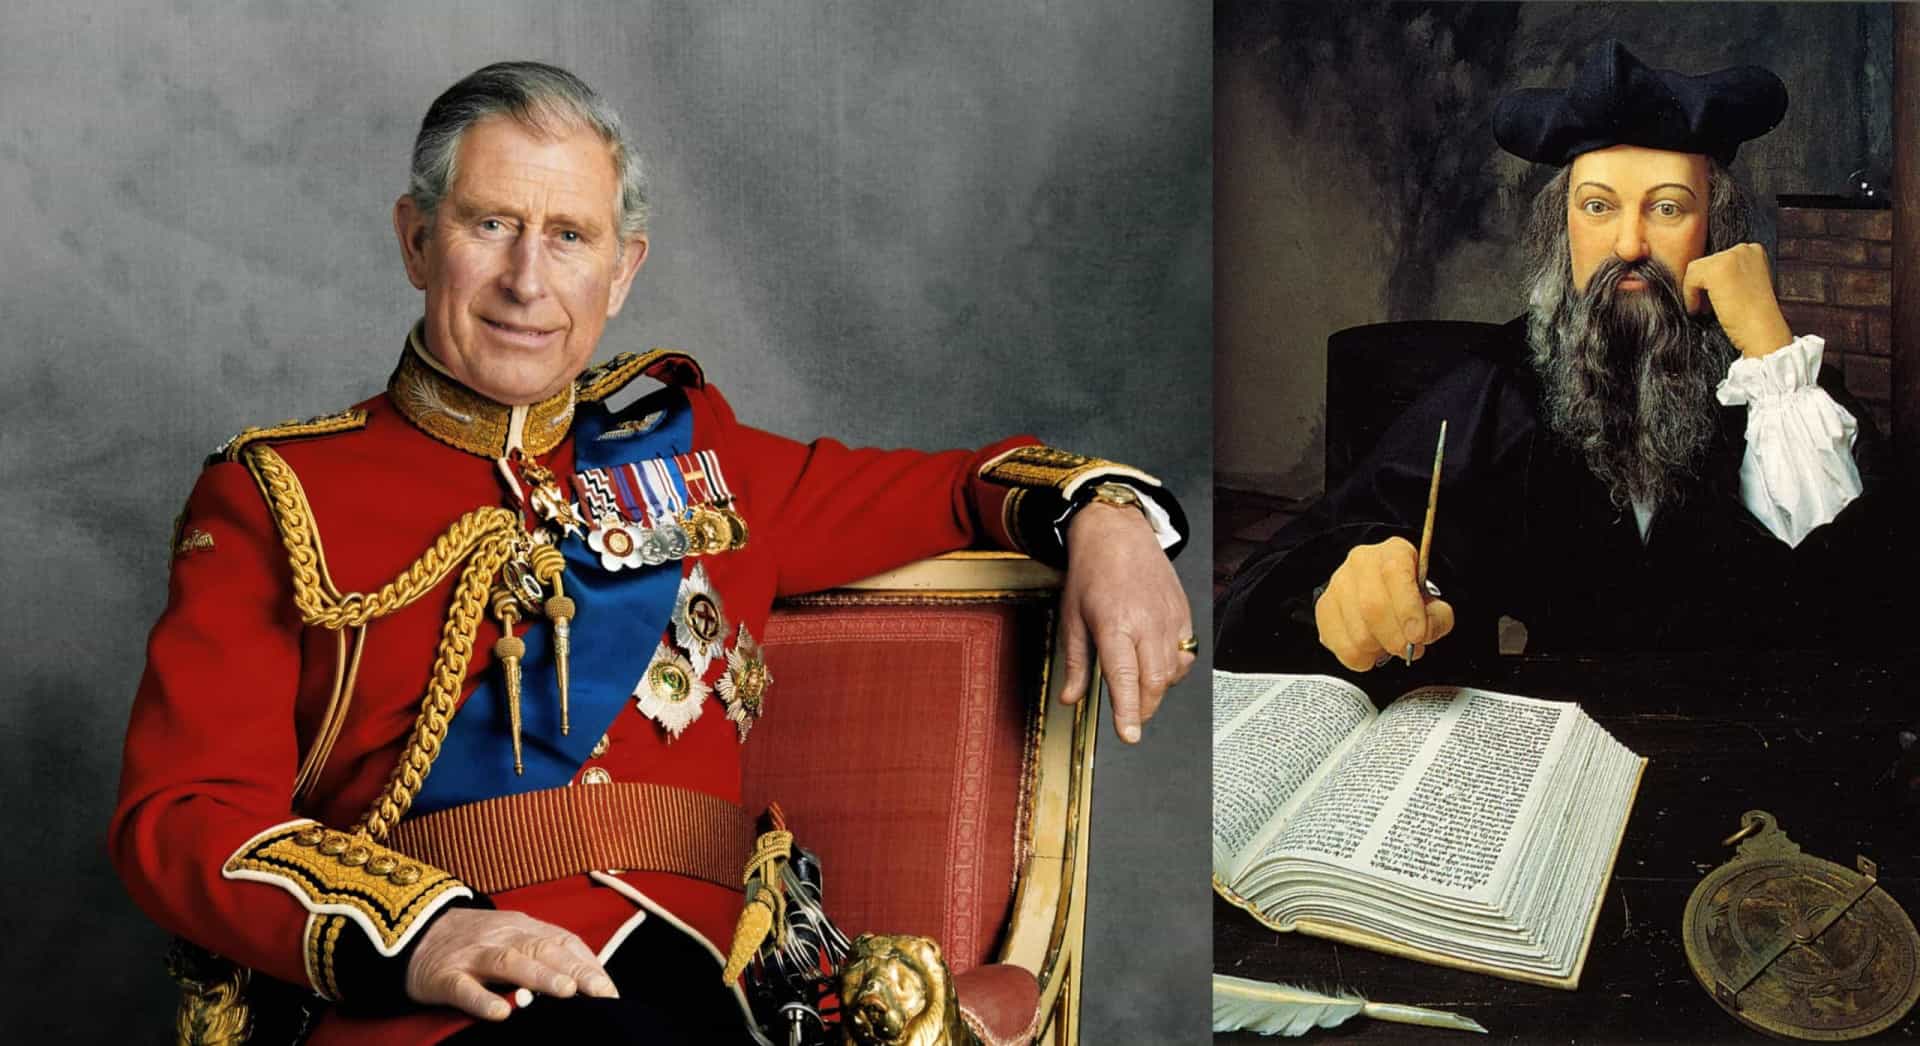 Will King Charles III abdicate? The shocking predictions of Nostradamus